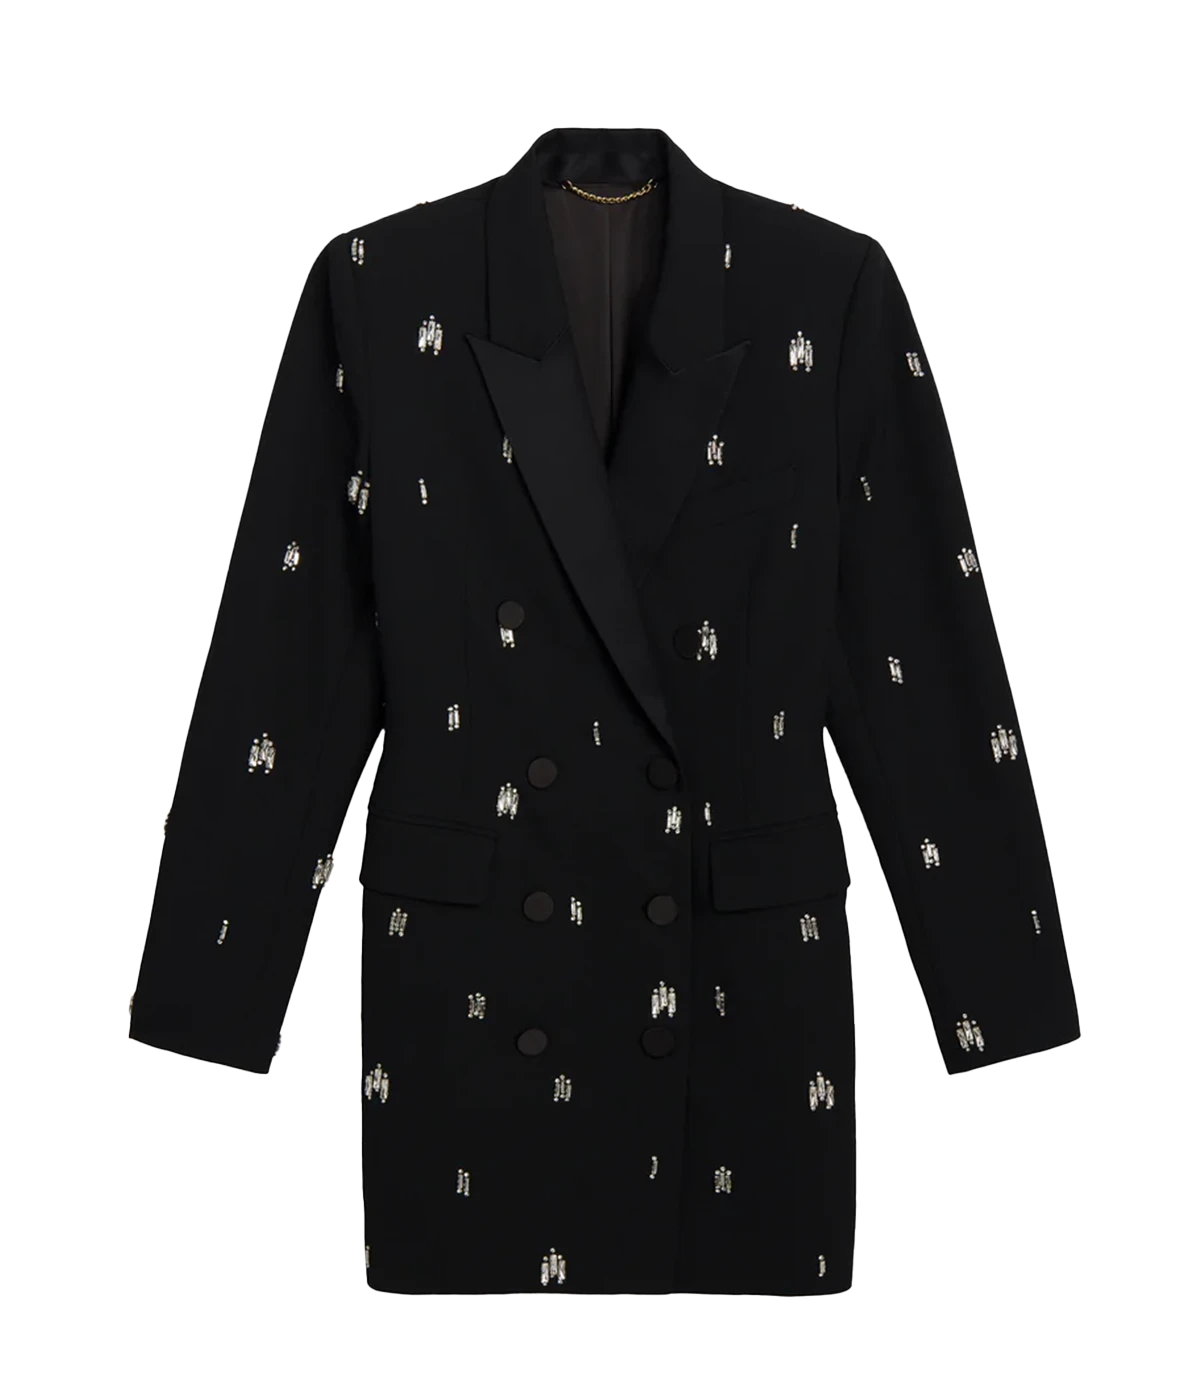 A standout special occasion mini blazer style dress, with long sleeves and embellished crystals, tuxedo lapel and double breasted. Stand out, date night look, made in USA, bra friendly, Christmas outfit, party season.   